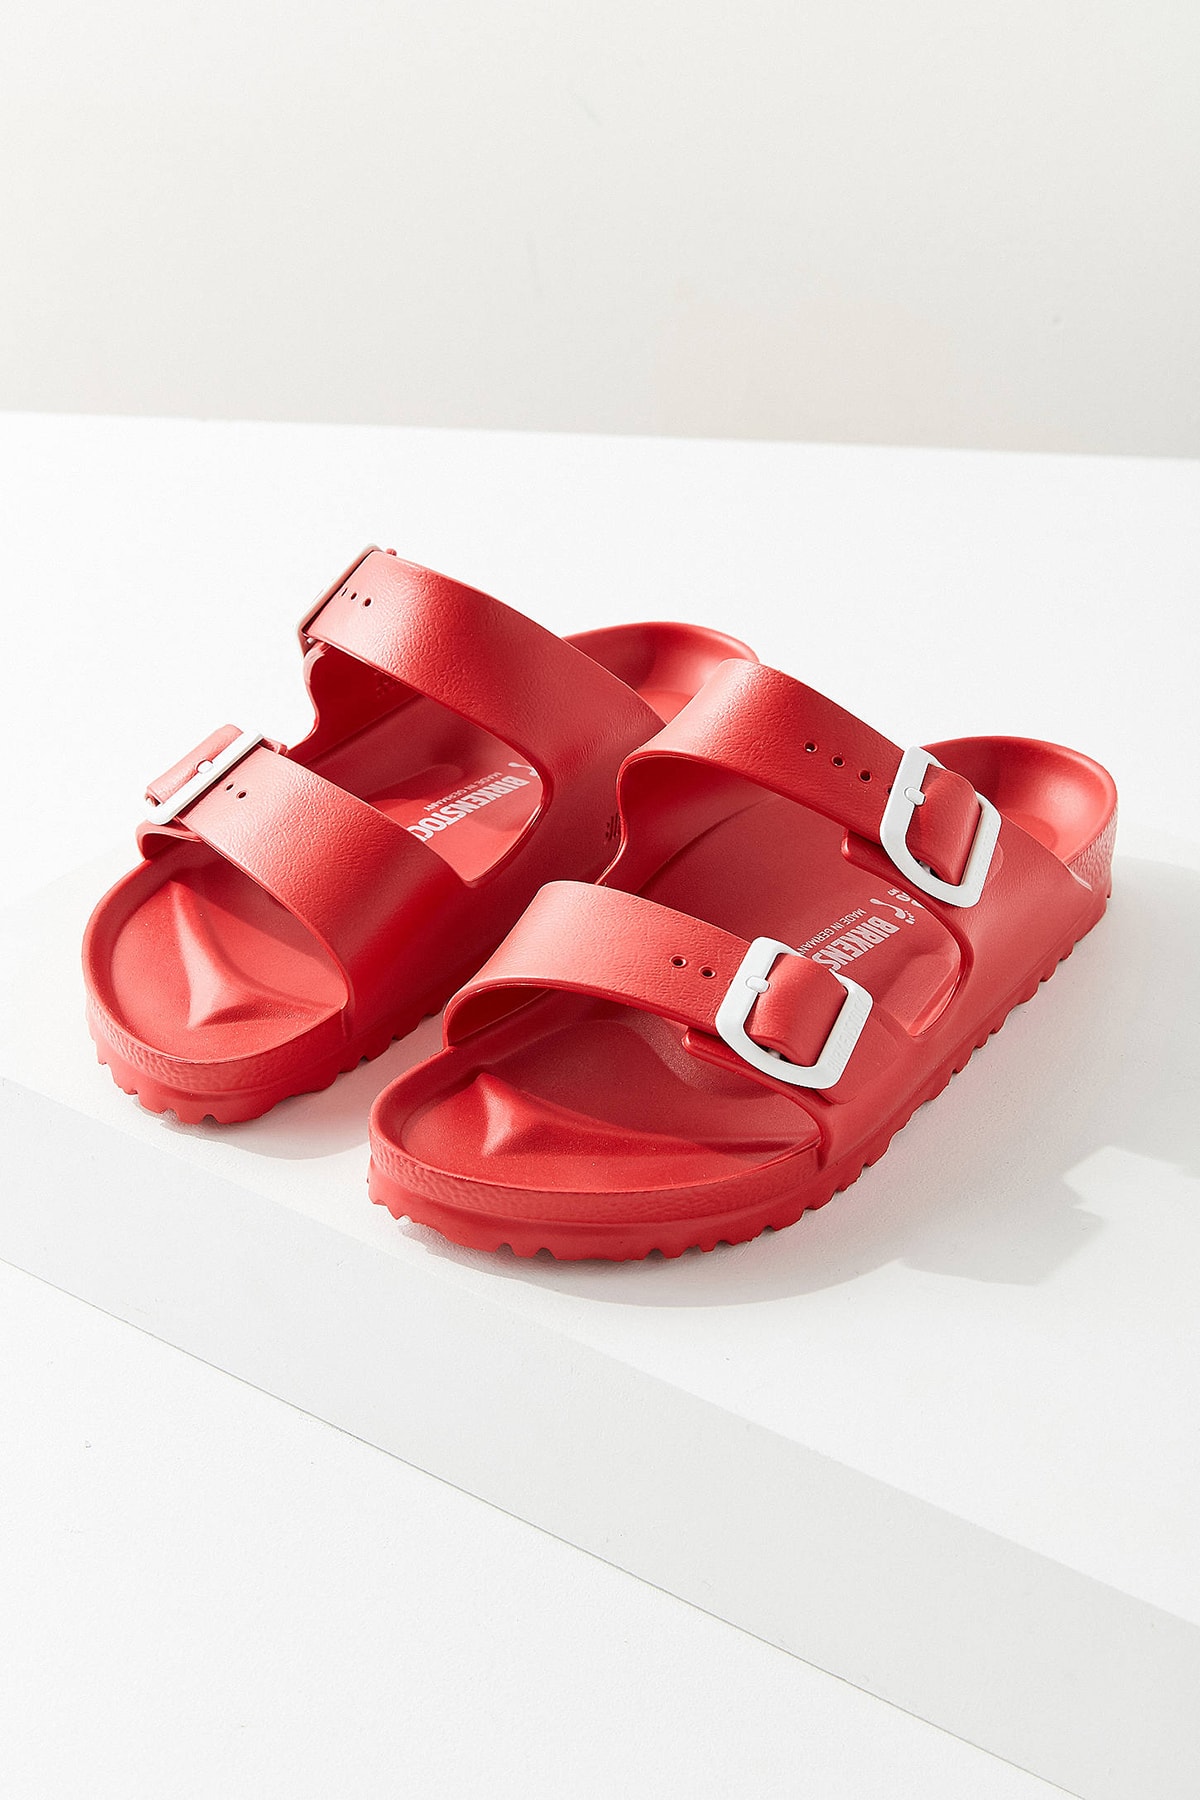 Birkenstock Arizona EVA Sandals Red Urban Outfitters Price Release Slip Ons Slippers Where to Buy